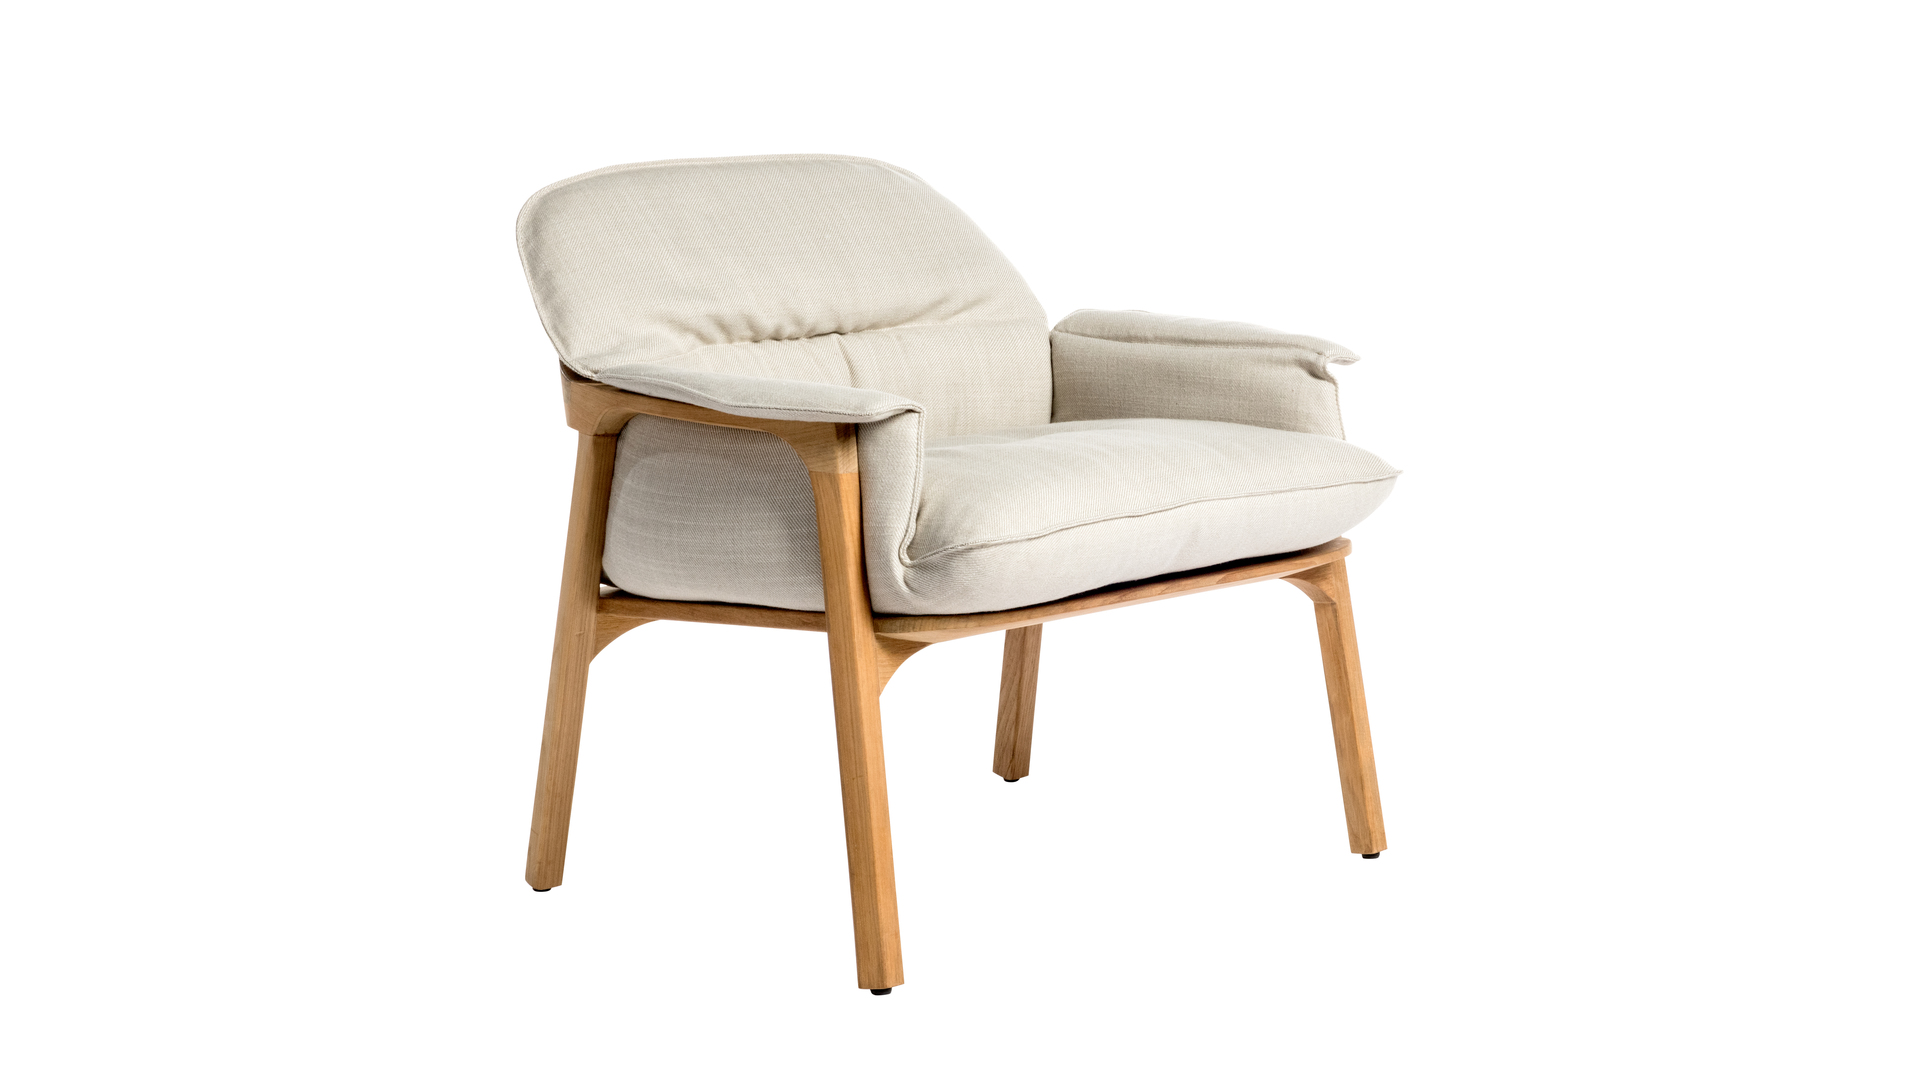 Nomad easy chair off-white cushion.jpg